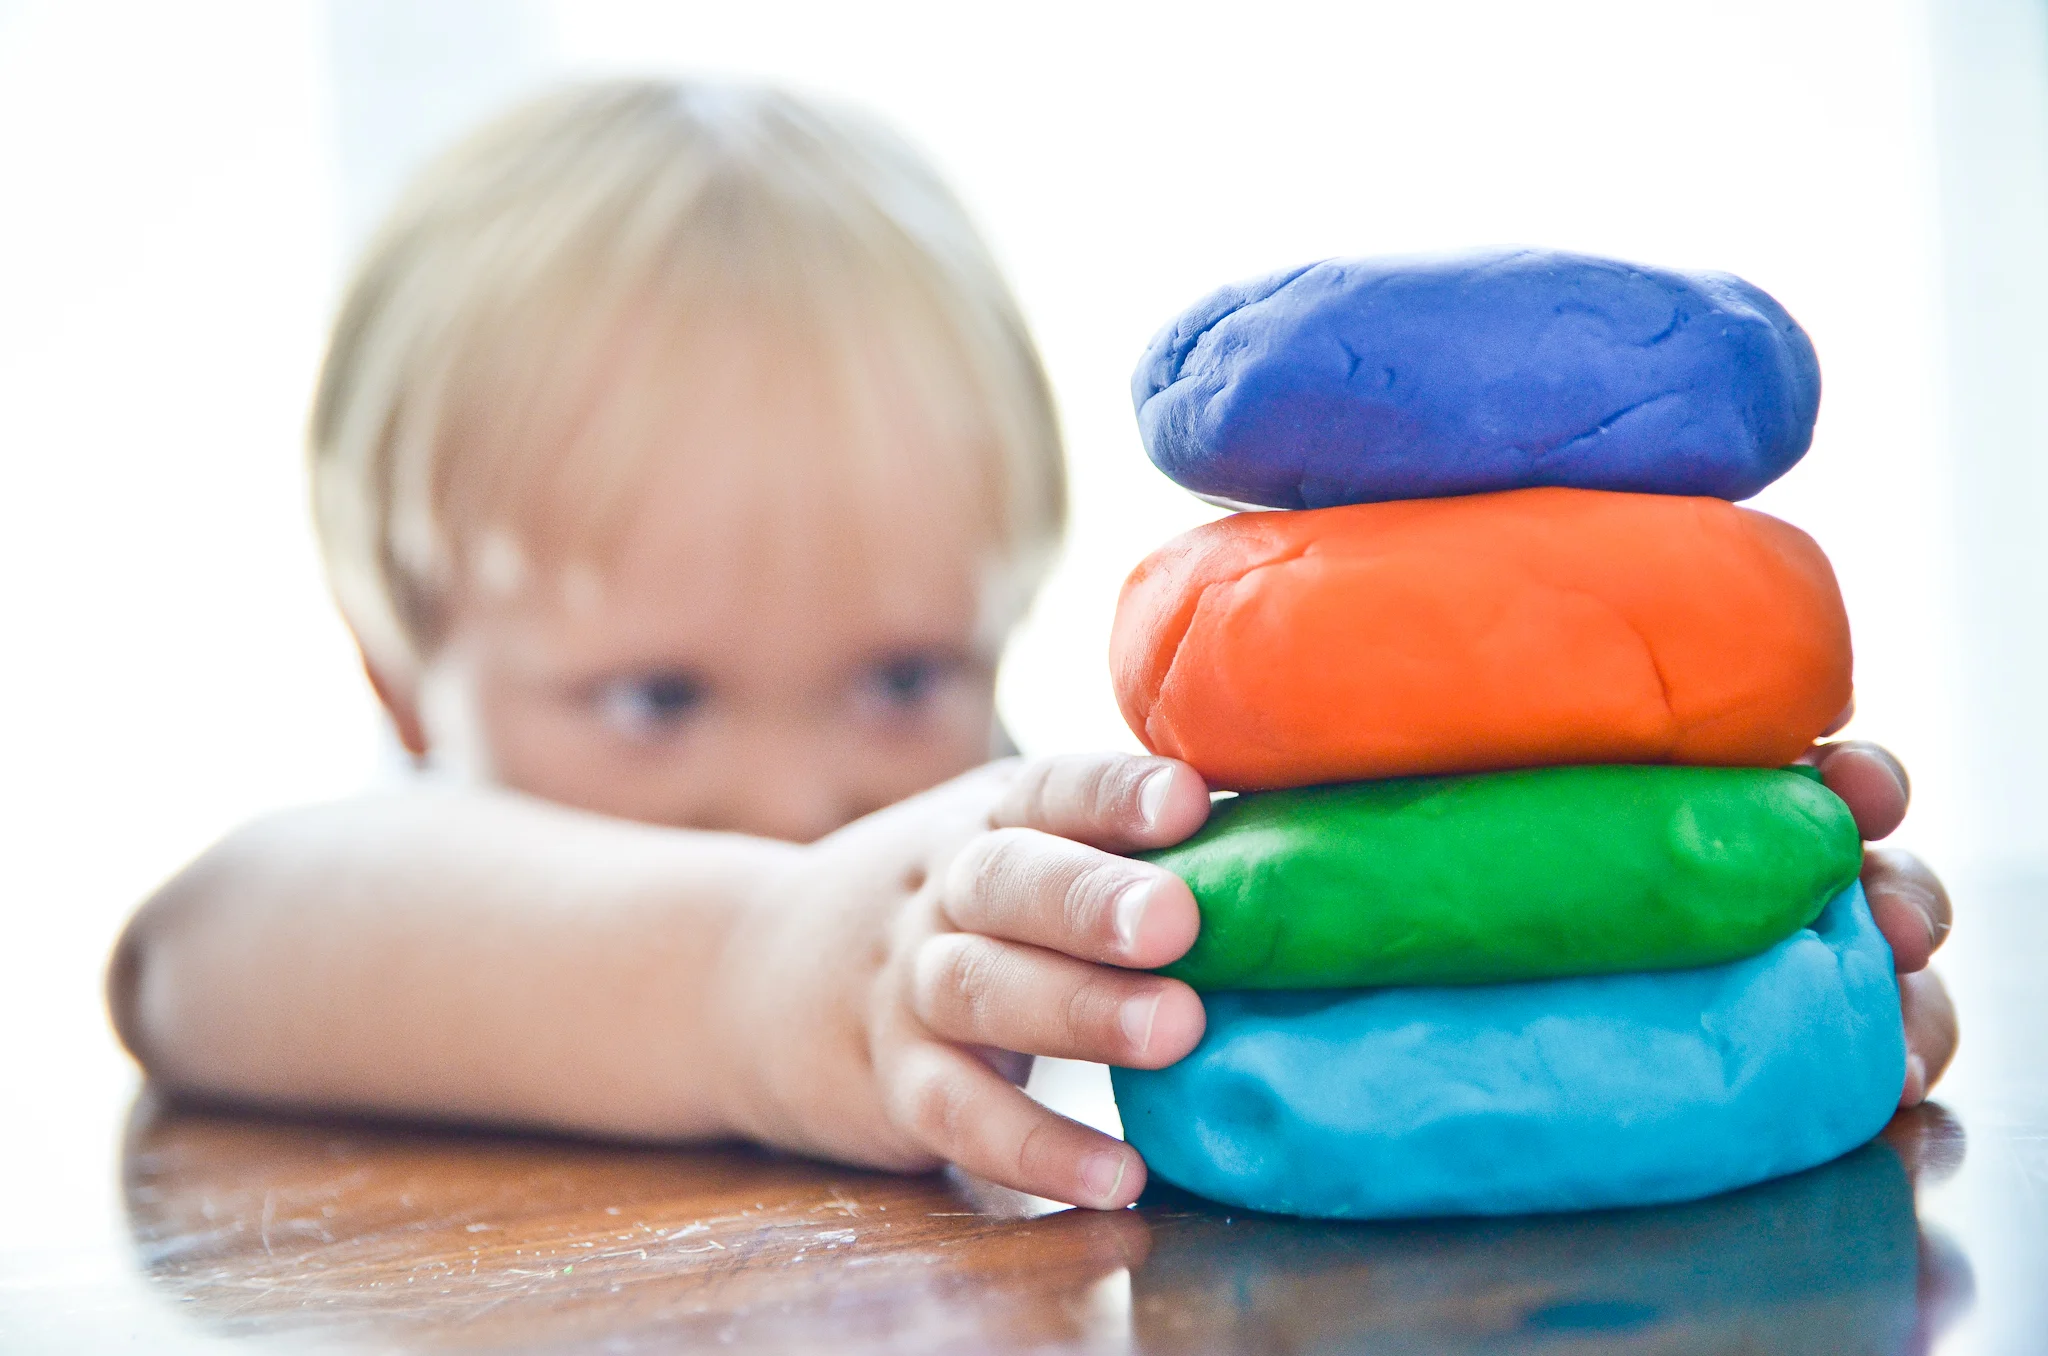 How To Make Non-Toxic Playdough For Your Baby? 